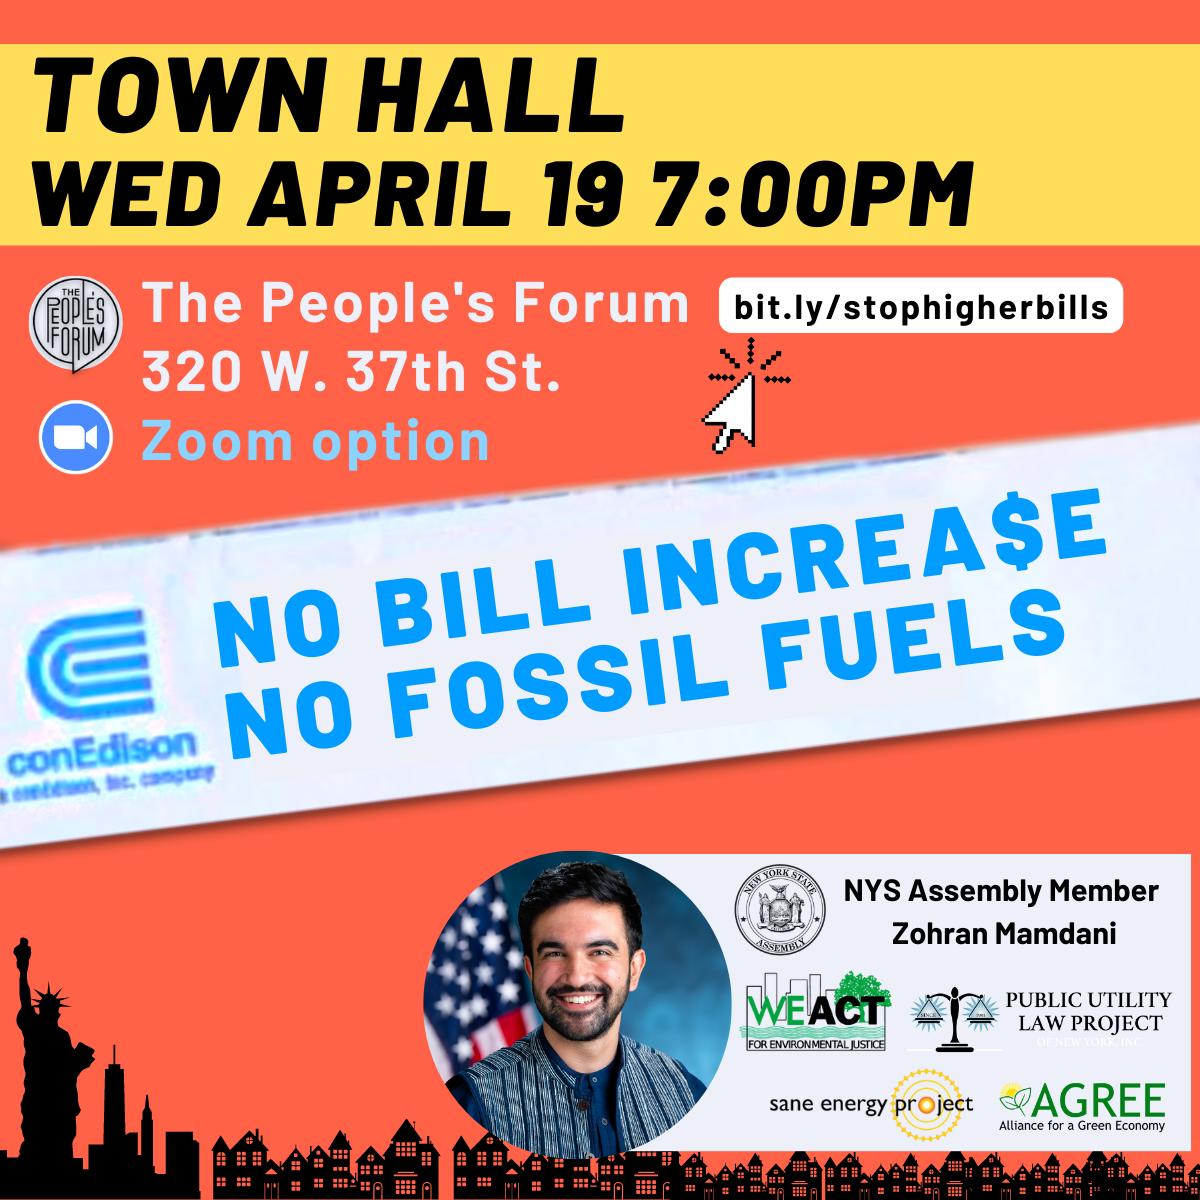 No bill increase, no fossil fuels, Con Ed town hall wed april 19 7 pm at The People's Forum, 320 west 37th street. Zoom option.